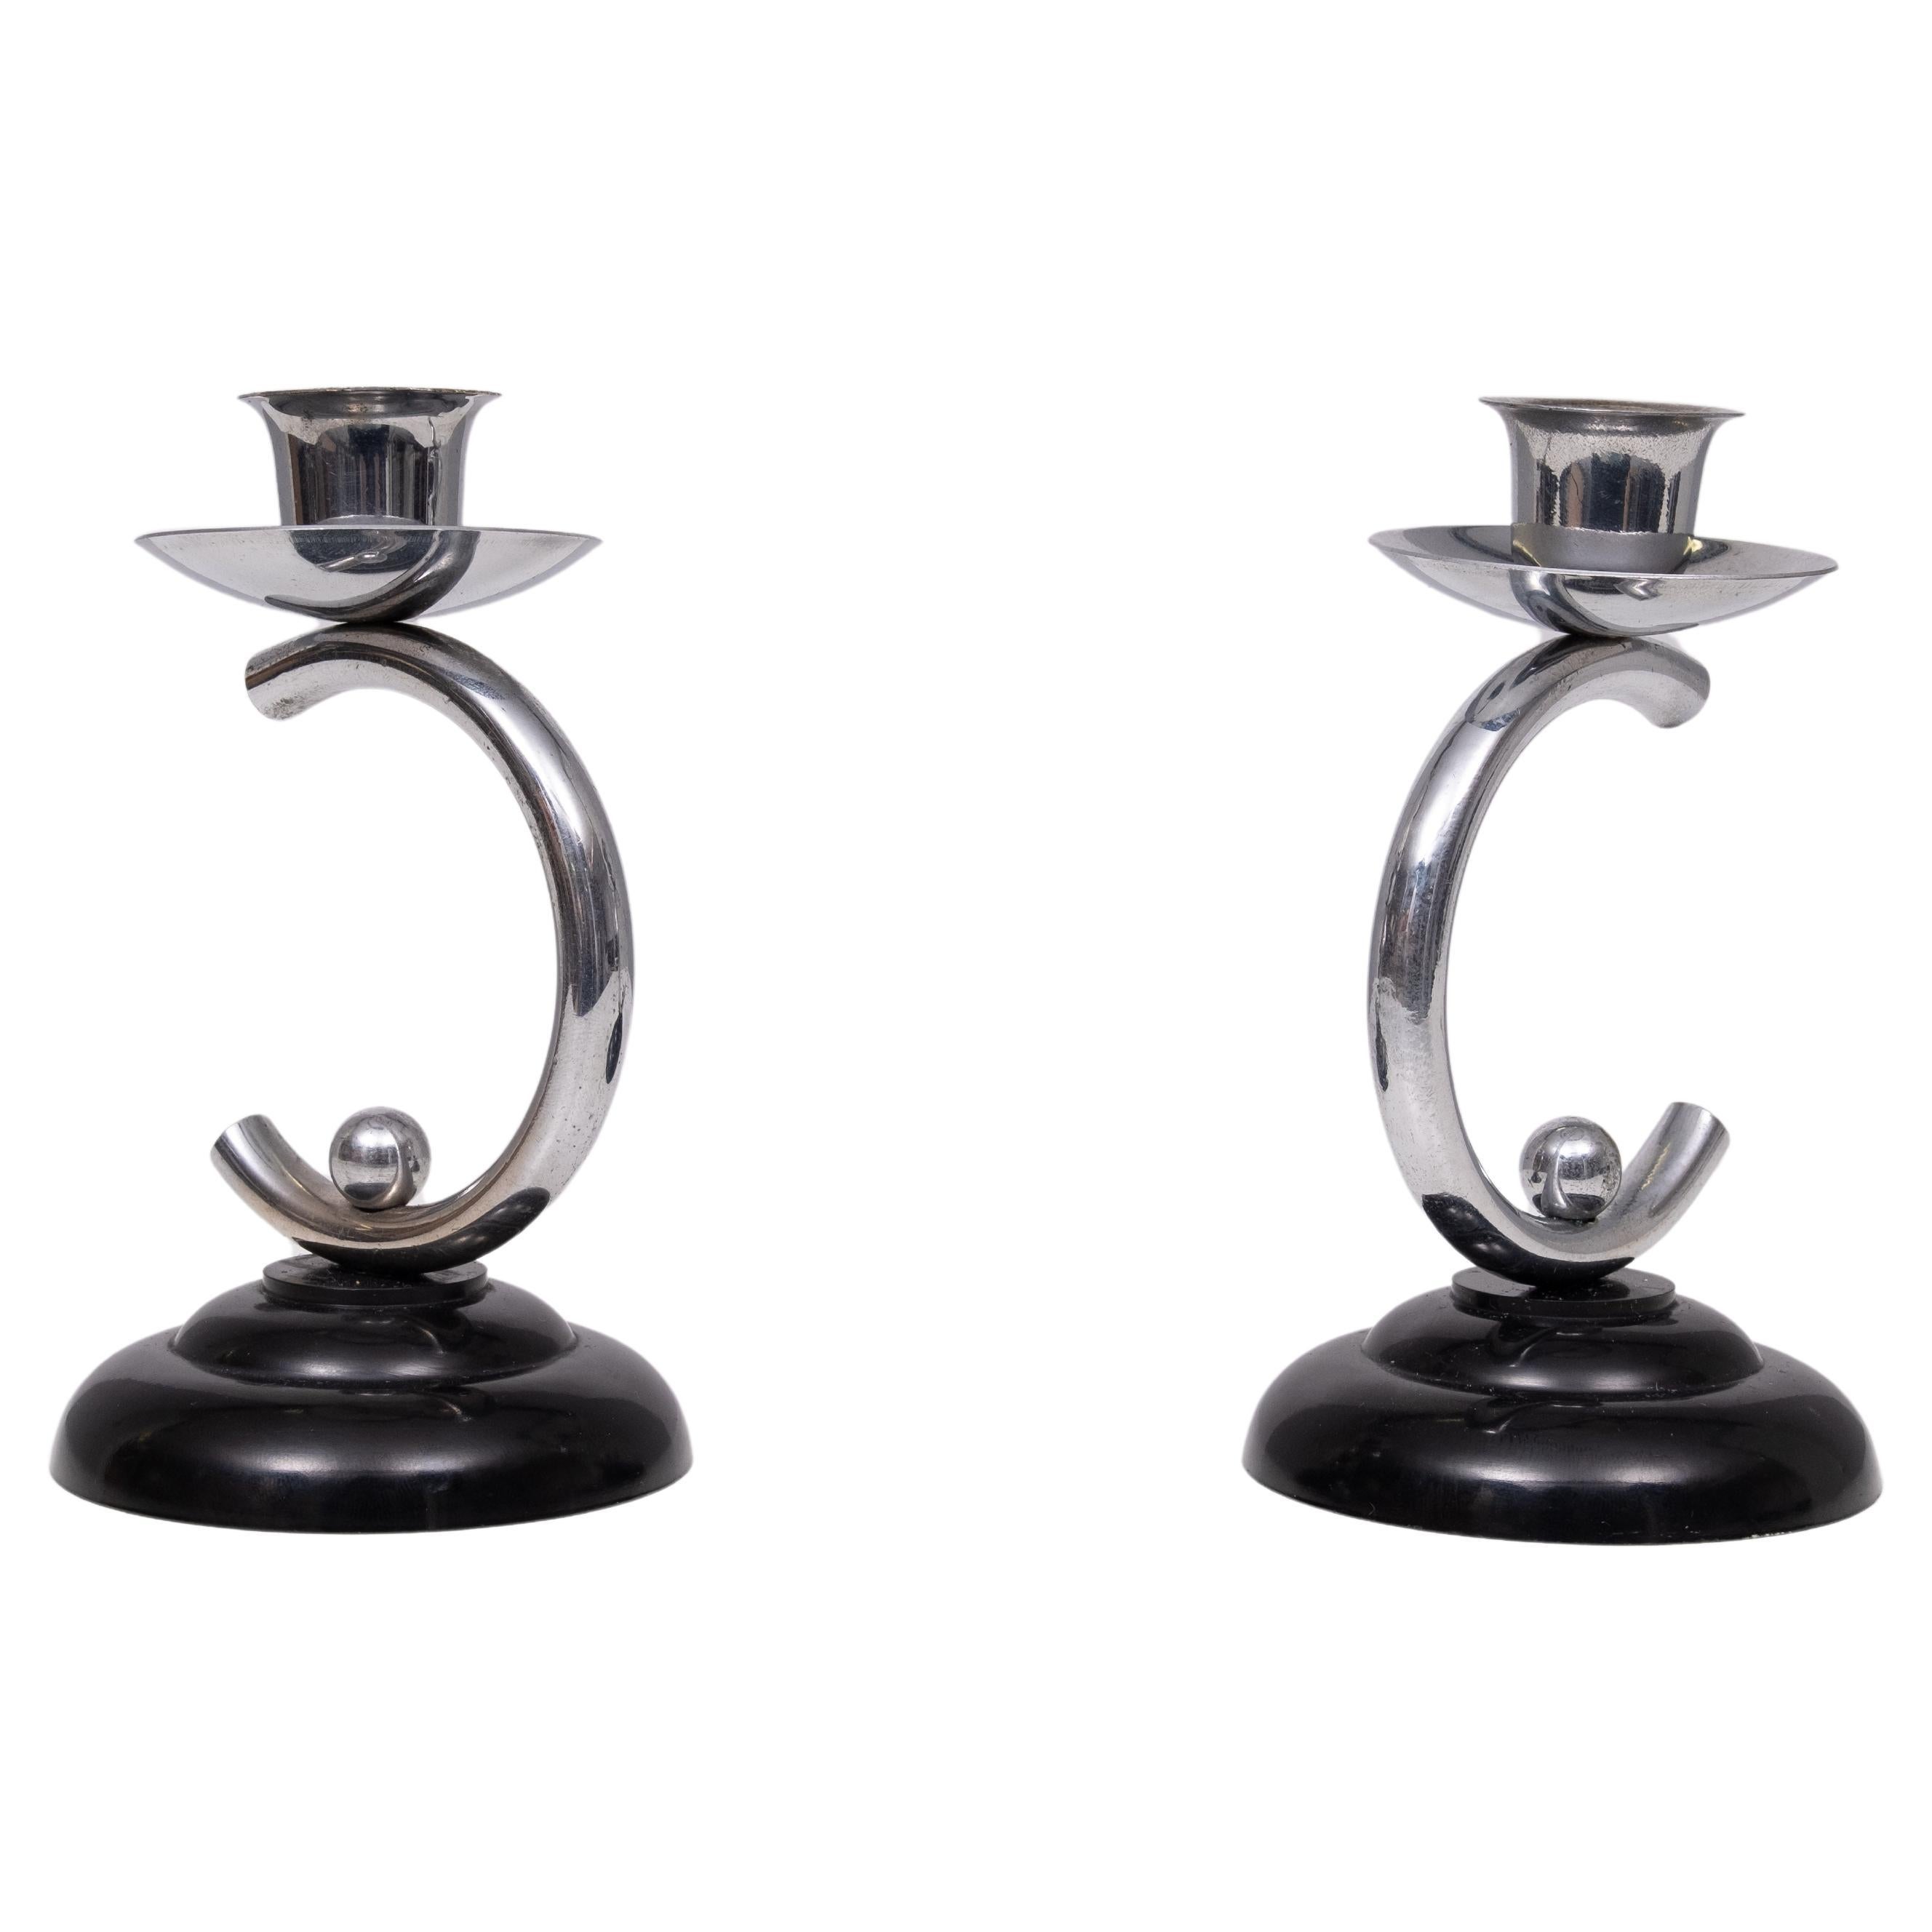 Lovely set of real Art Deco candle sticks .Black Bakelite feet ,
comes with a curved chrome candle holder . Manufactured by
Noordermeer Holland 1930s 